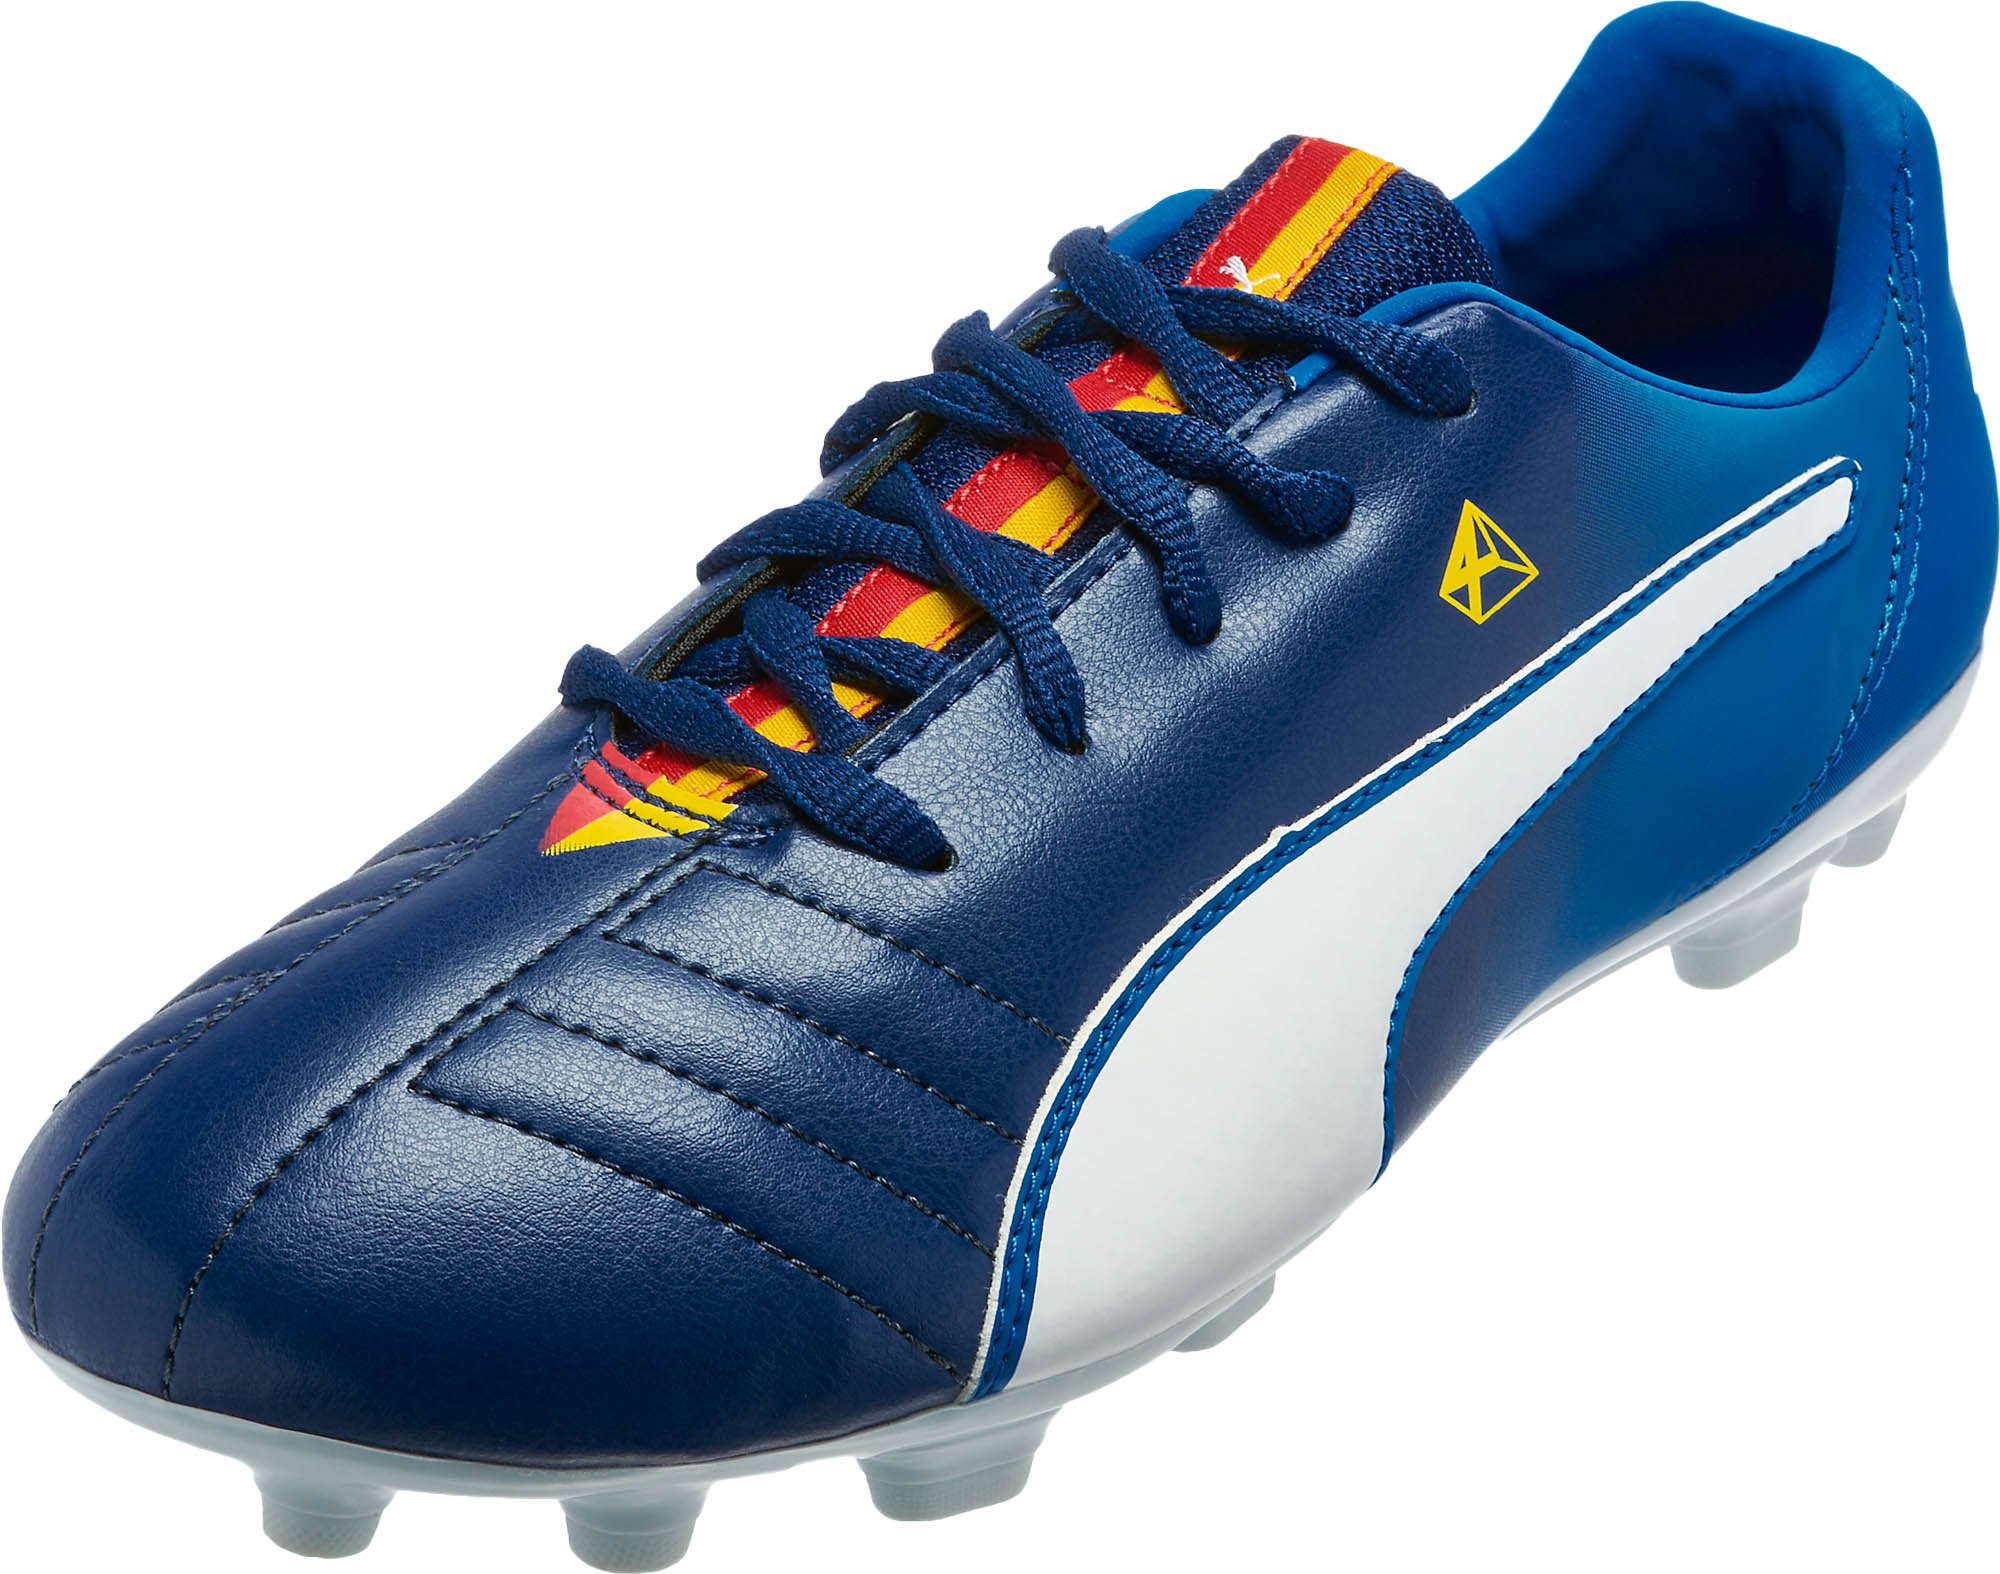 puma youth soccer shoes